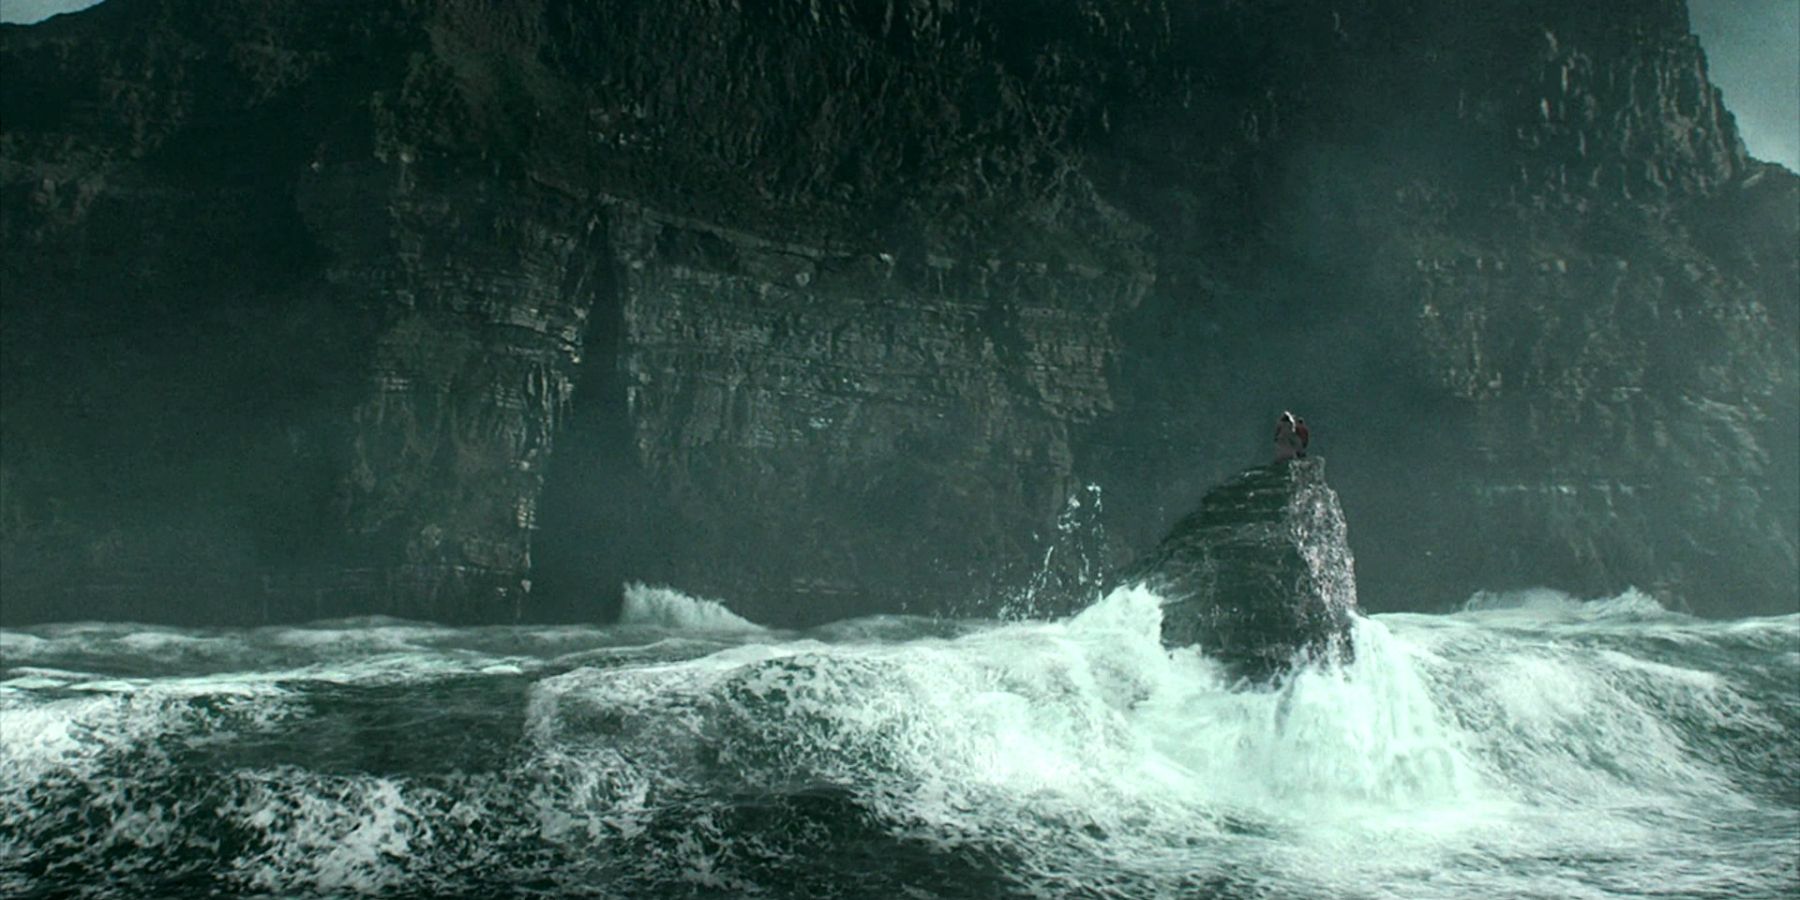 Harry Potter and Dumbledore prepare to explore a cave in the Half-Blood Prince